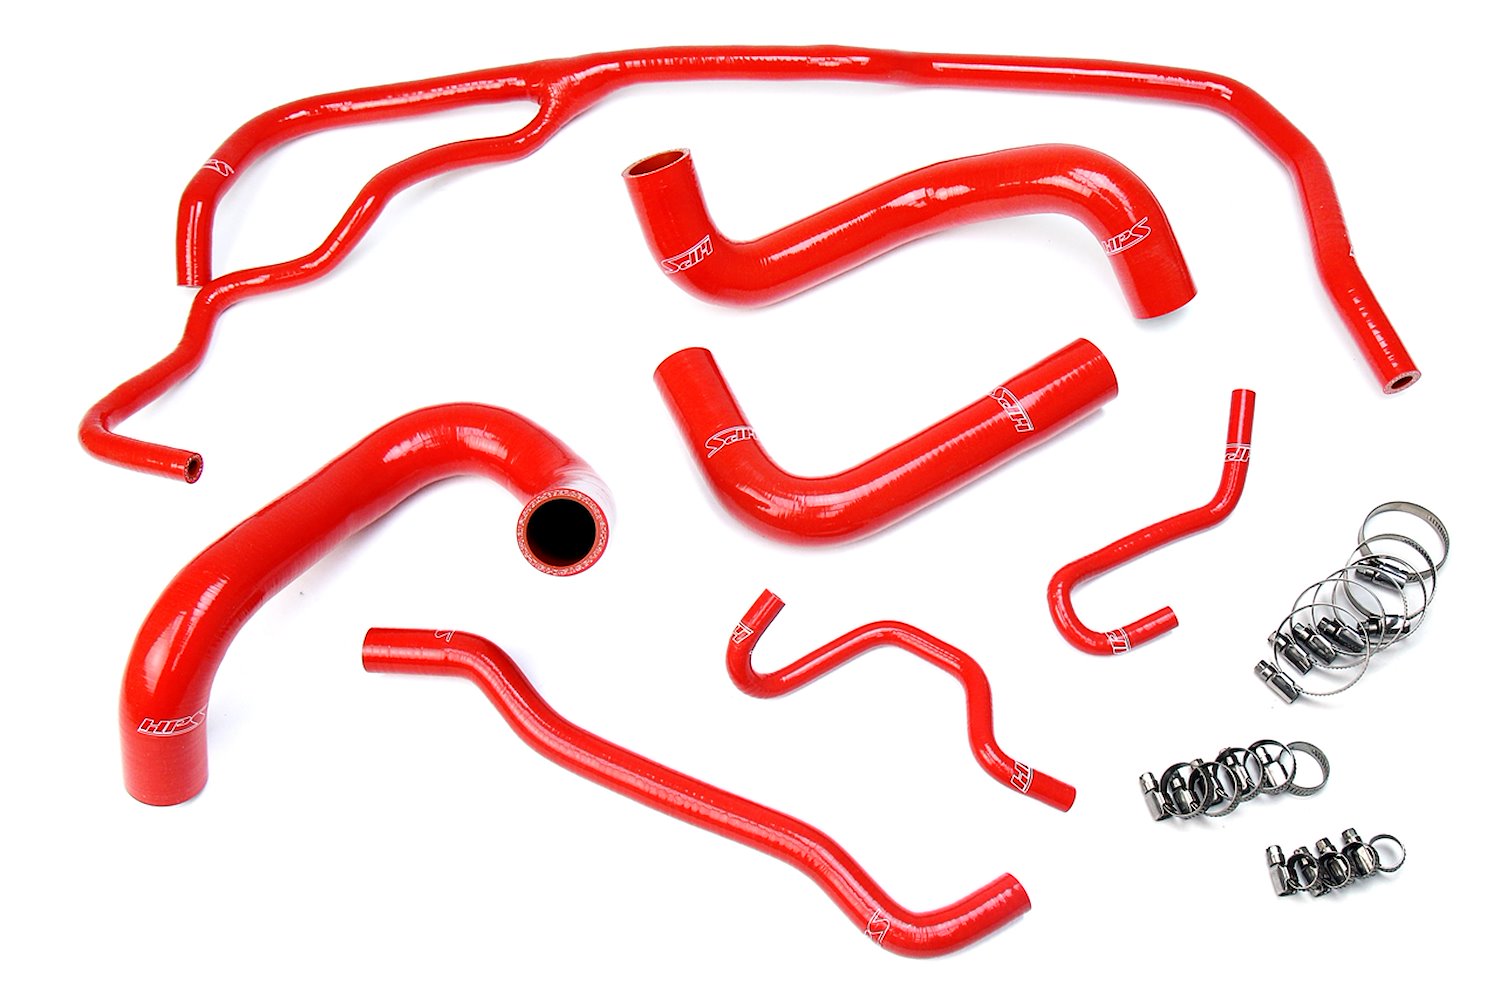 57-1725-RED Radiator Hose Kit, High-Temp 3-Ply Reinforced Silicone, Replace OEM Rubber Radiator Coolant Hoses